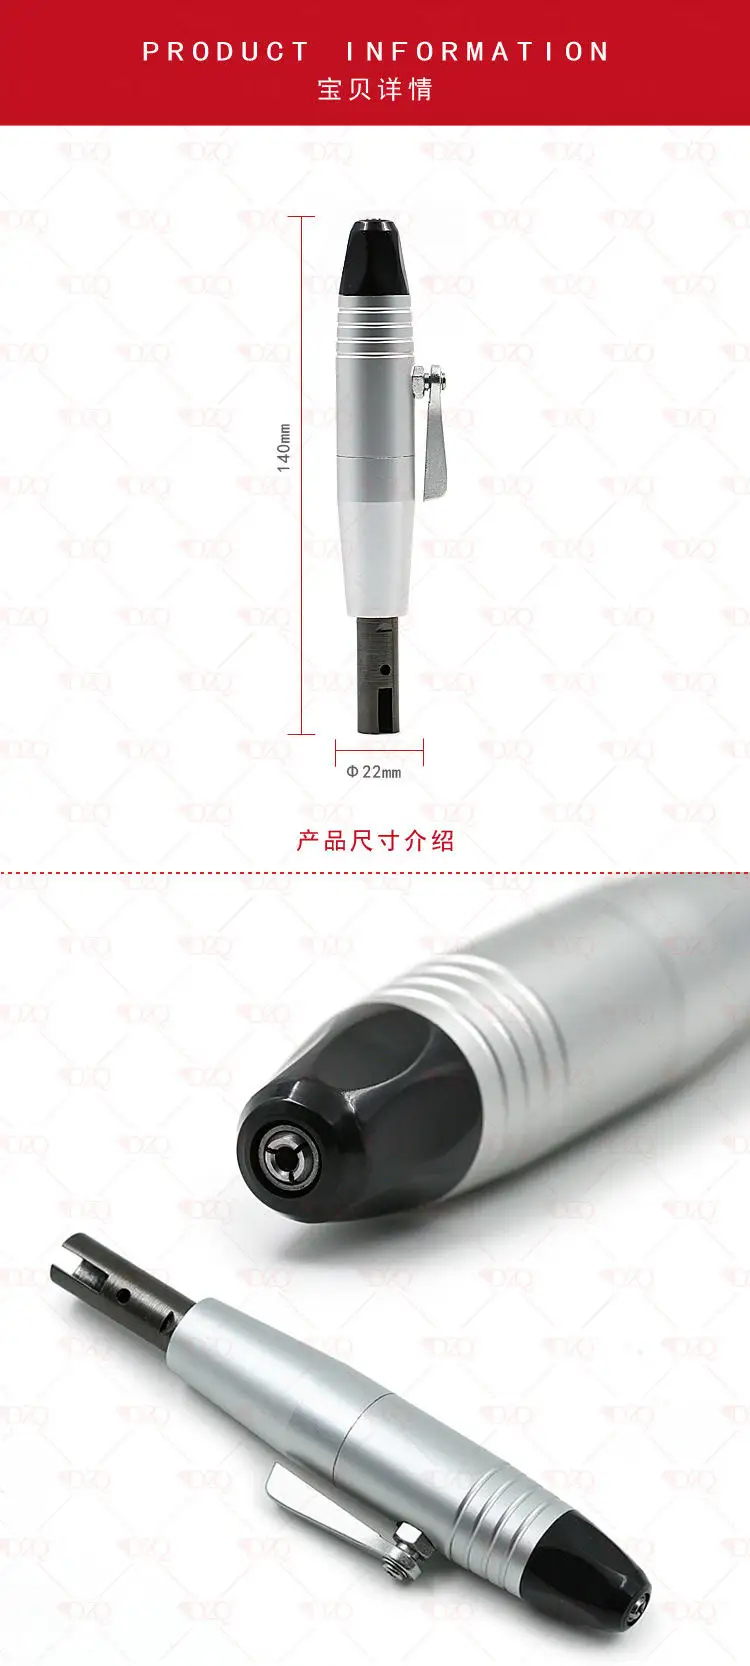 Rotary Quick Change Handpiece Flex Shaft 3/32'' / 2.35mm Shank Tool For Foredom A14_25